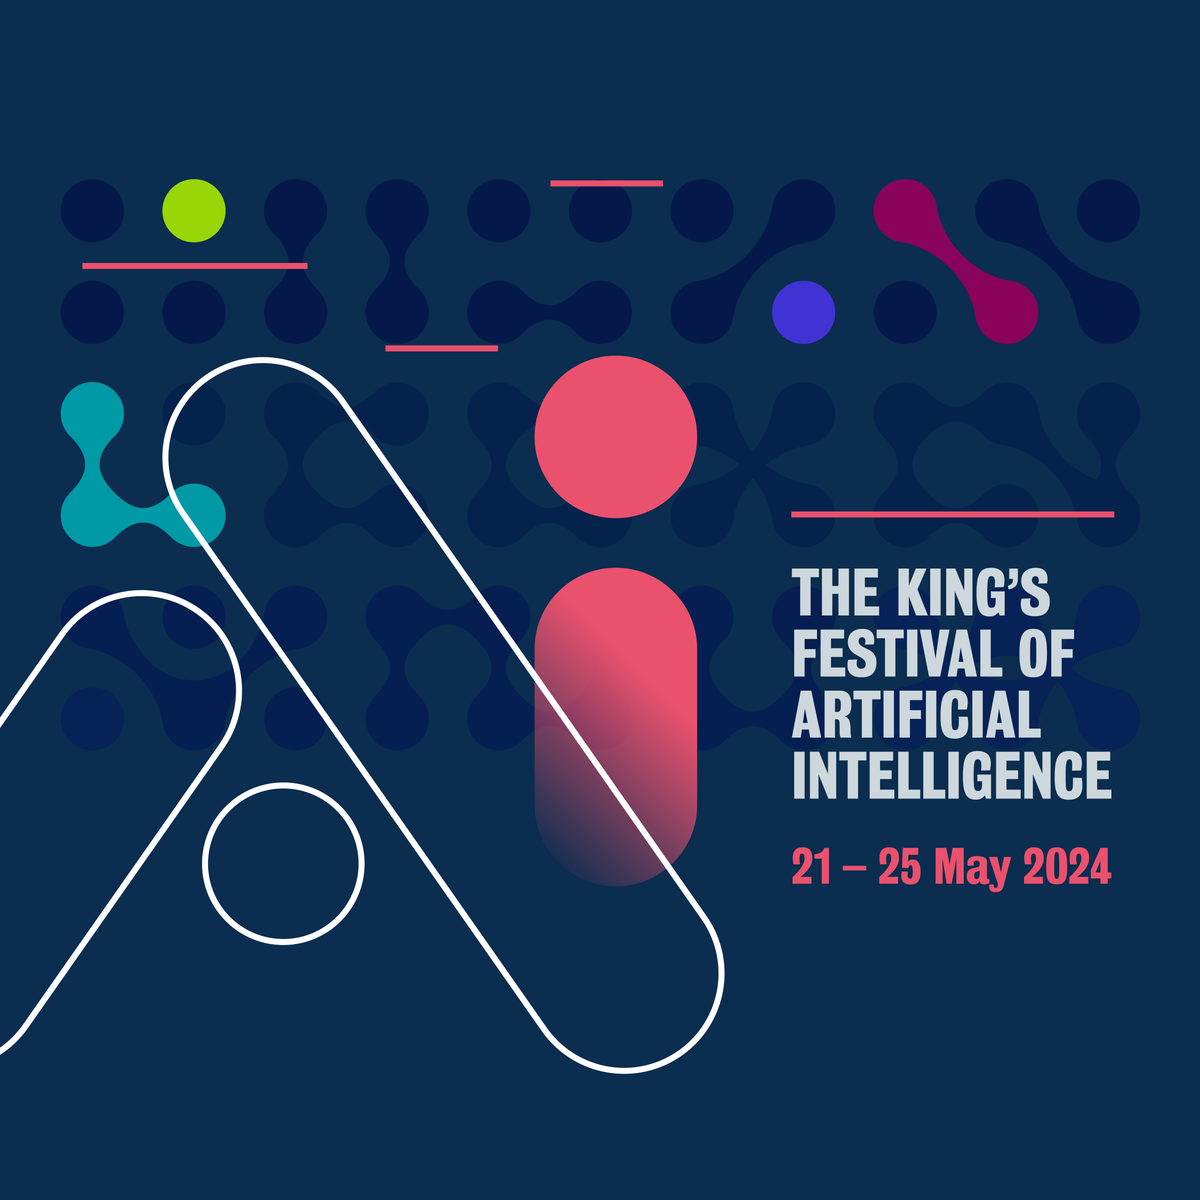 Come to the King’s Festival of Artificial Intelligence @aiatkings where experts will explore AI from many angles, including philosophy, social justice, healthcare, education, responsibility and creativity. 📍 The Strand Campus 🗓️ 21 - 25 May 2024 🔗 bit.ly/3WrCn7v